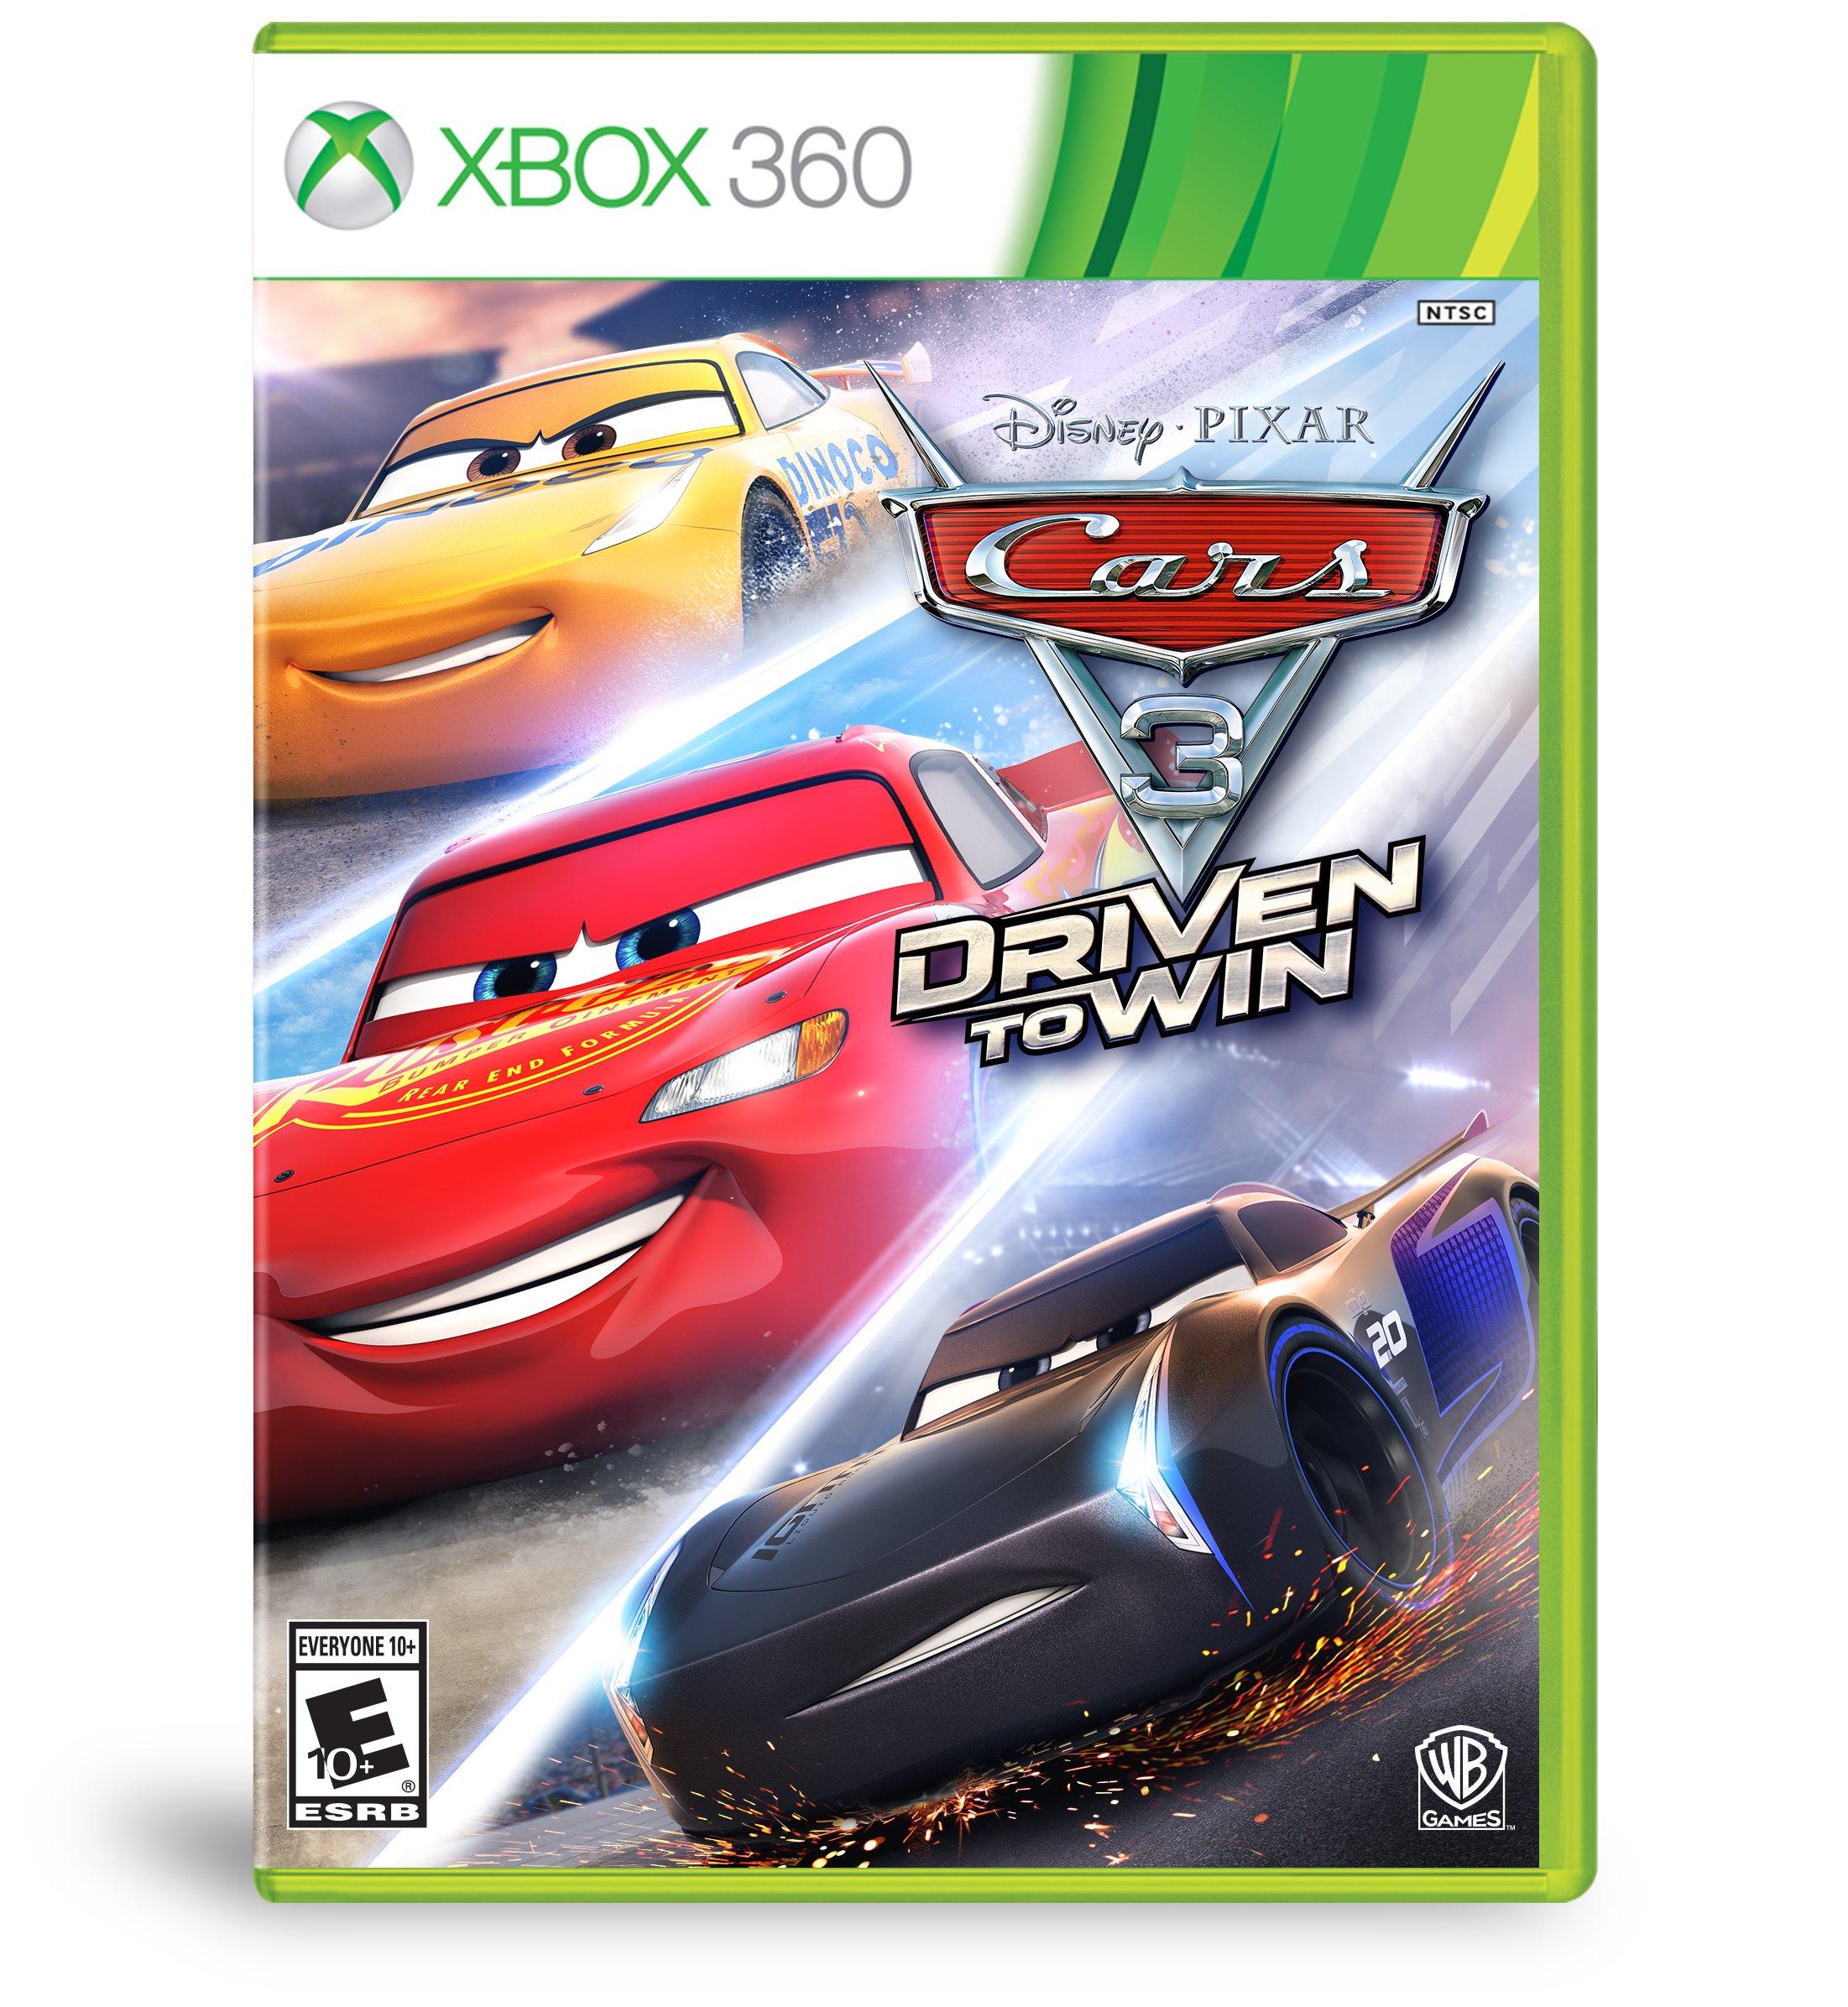 Cars 3: Driven to Win - Xbox 360